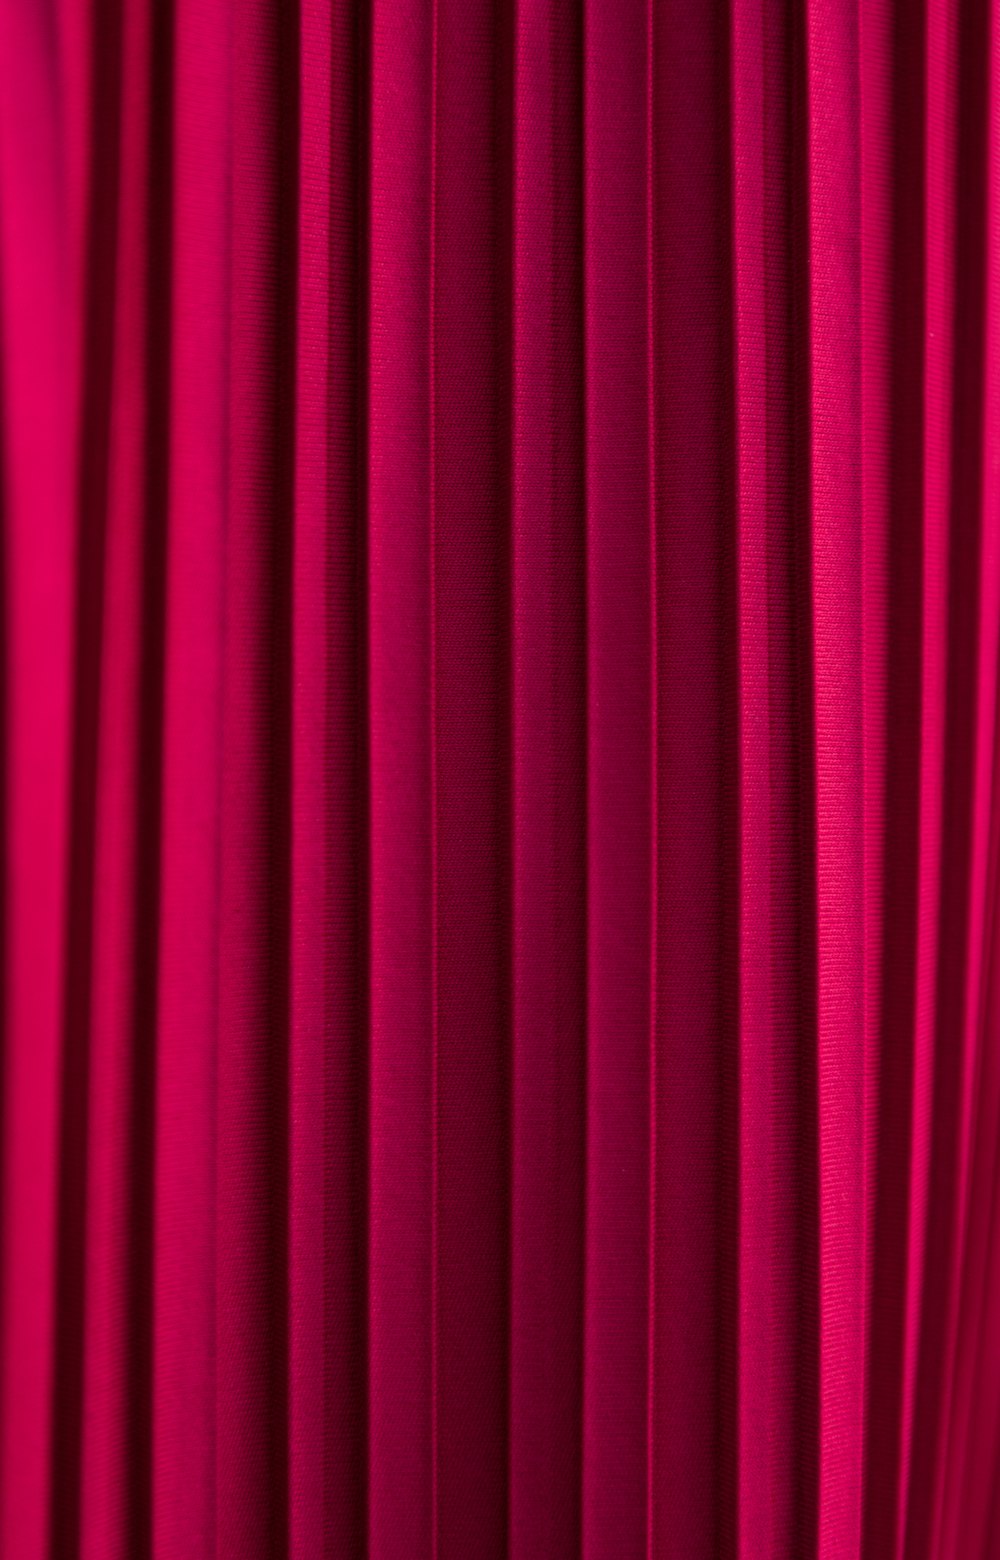 purple curtain in close up photography